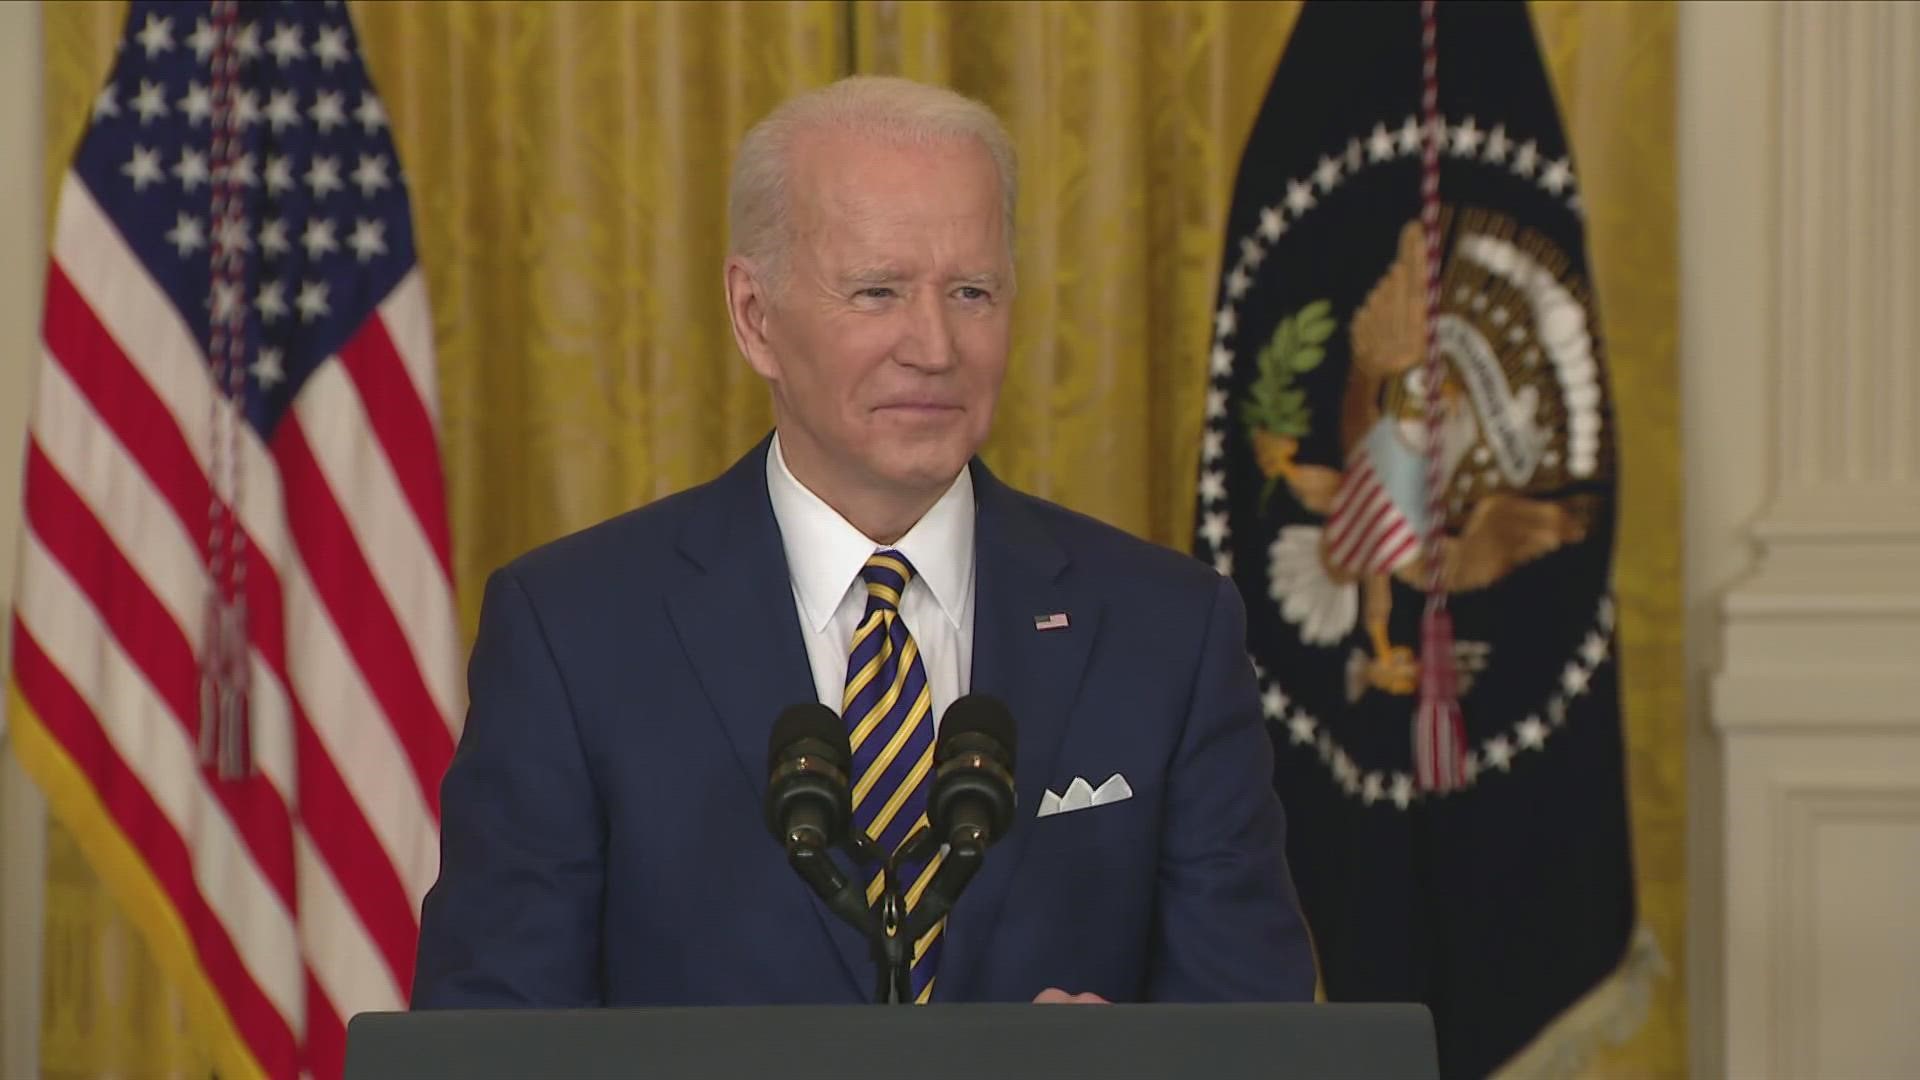 Biden answered reporters' questions on campaign promises, COVID-19, education, Ukraine-Russia tensions and more.